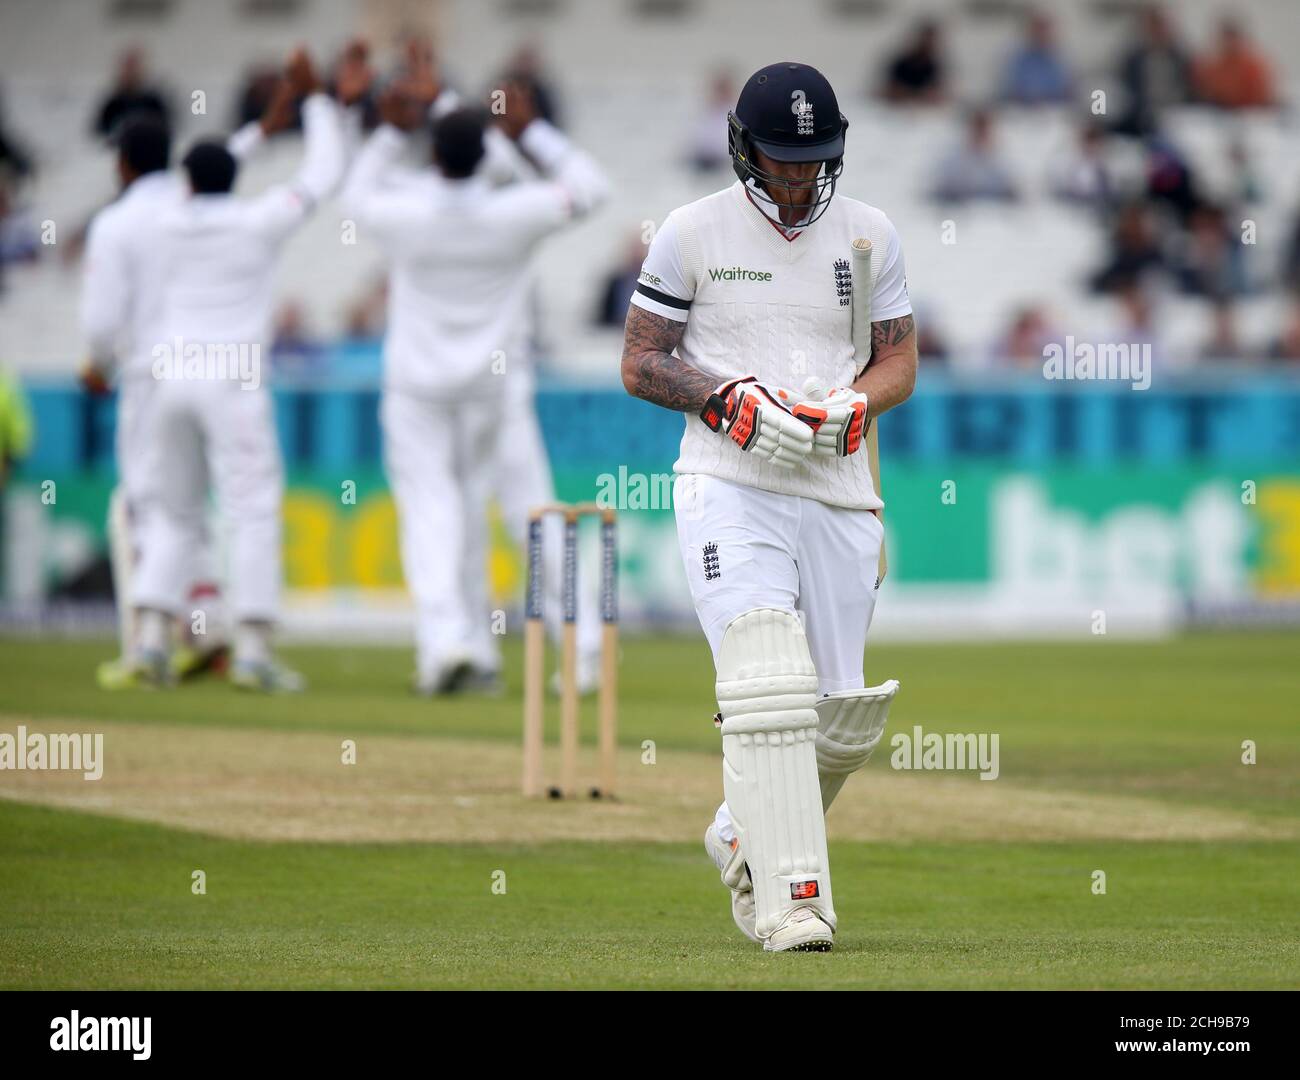 England's Ben Stokes walks off after being dismissed during day one of the 1st Investec Test at Headingley, Leeds. Stock Photo